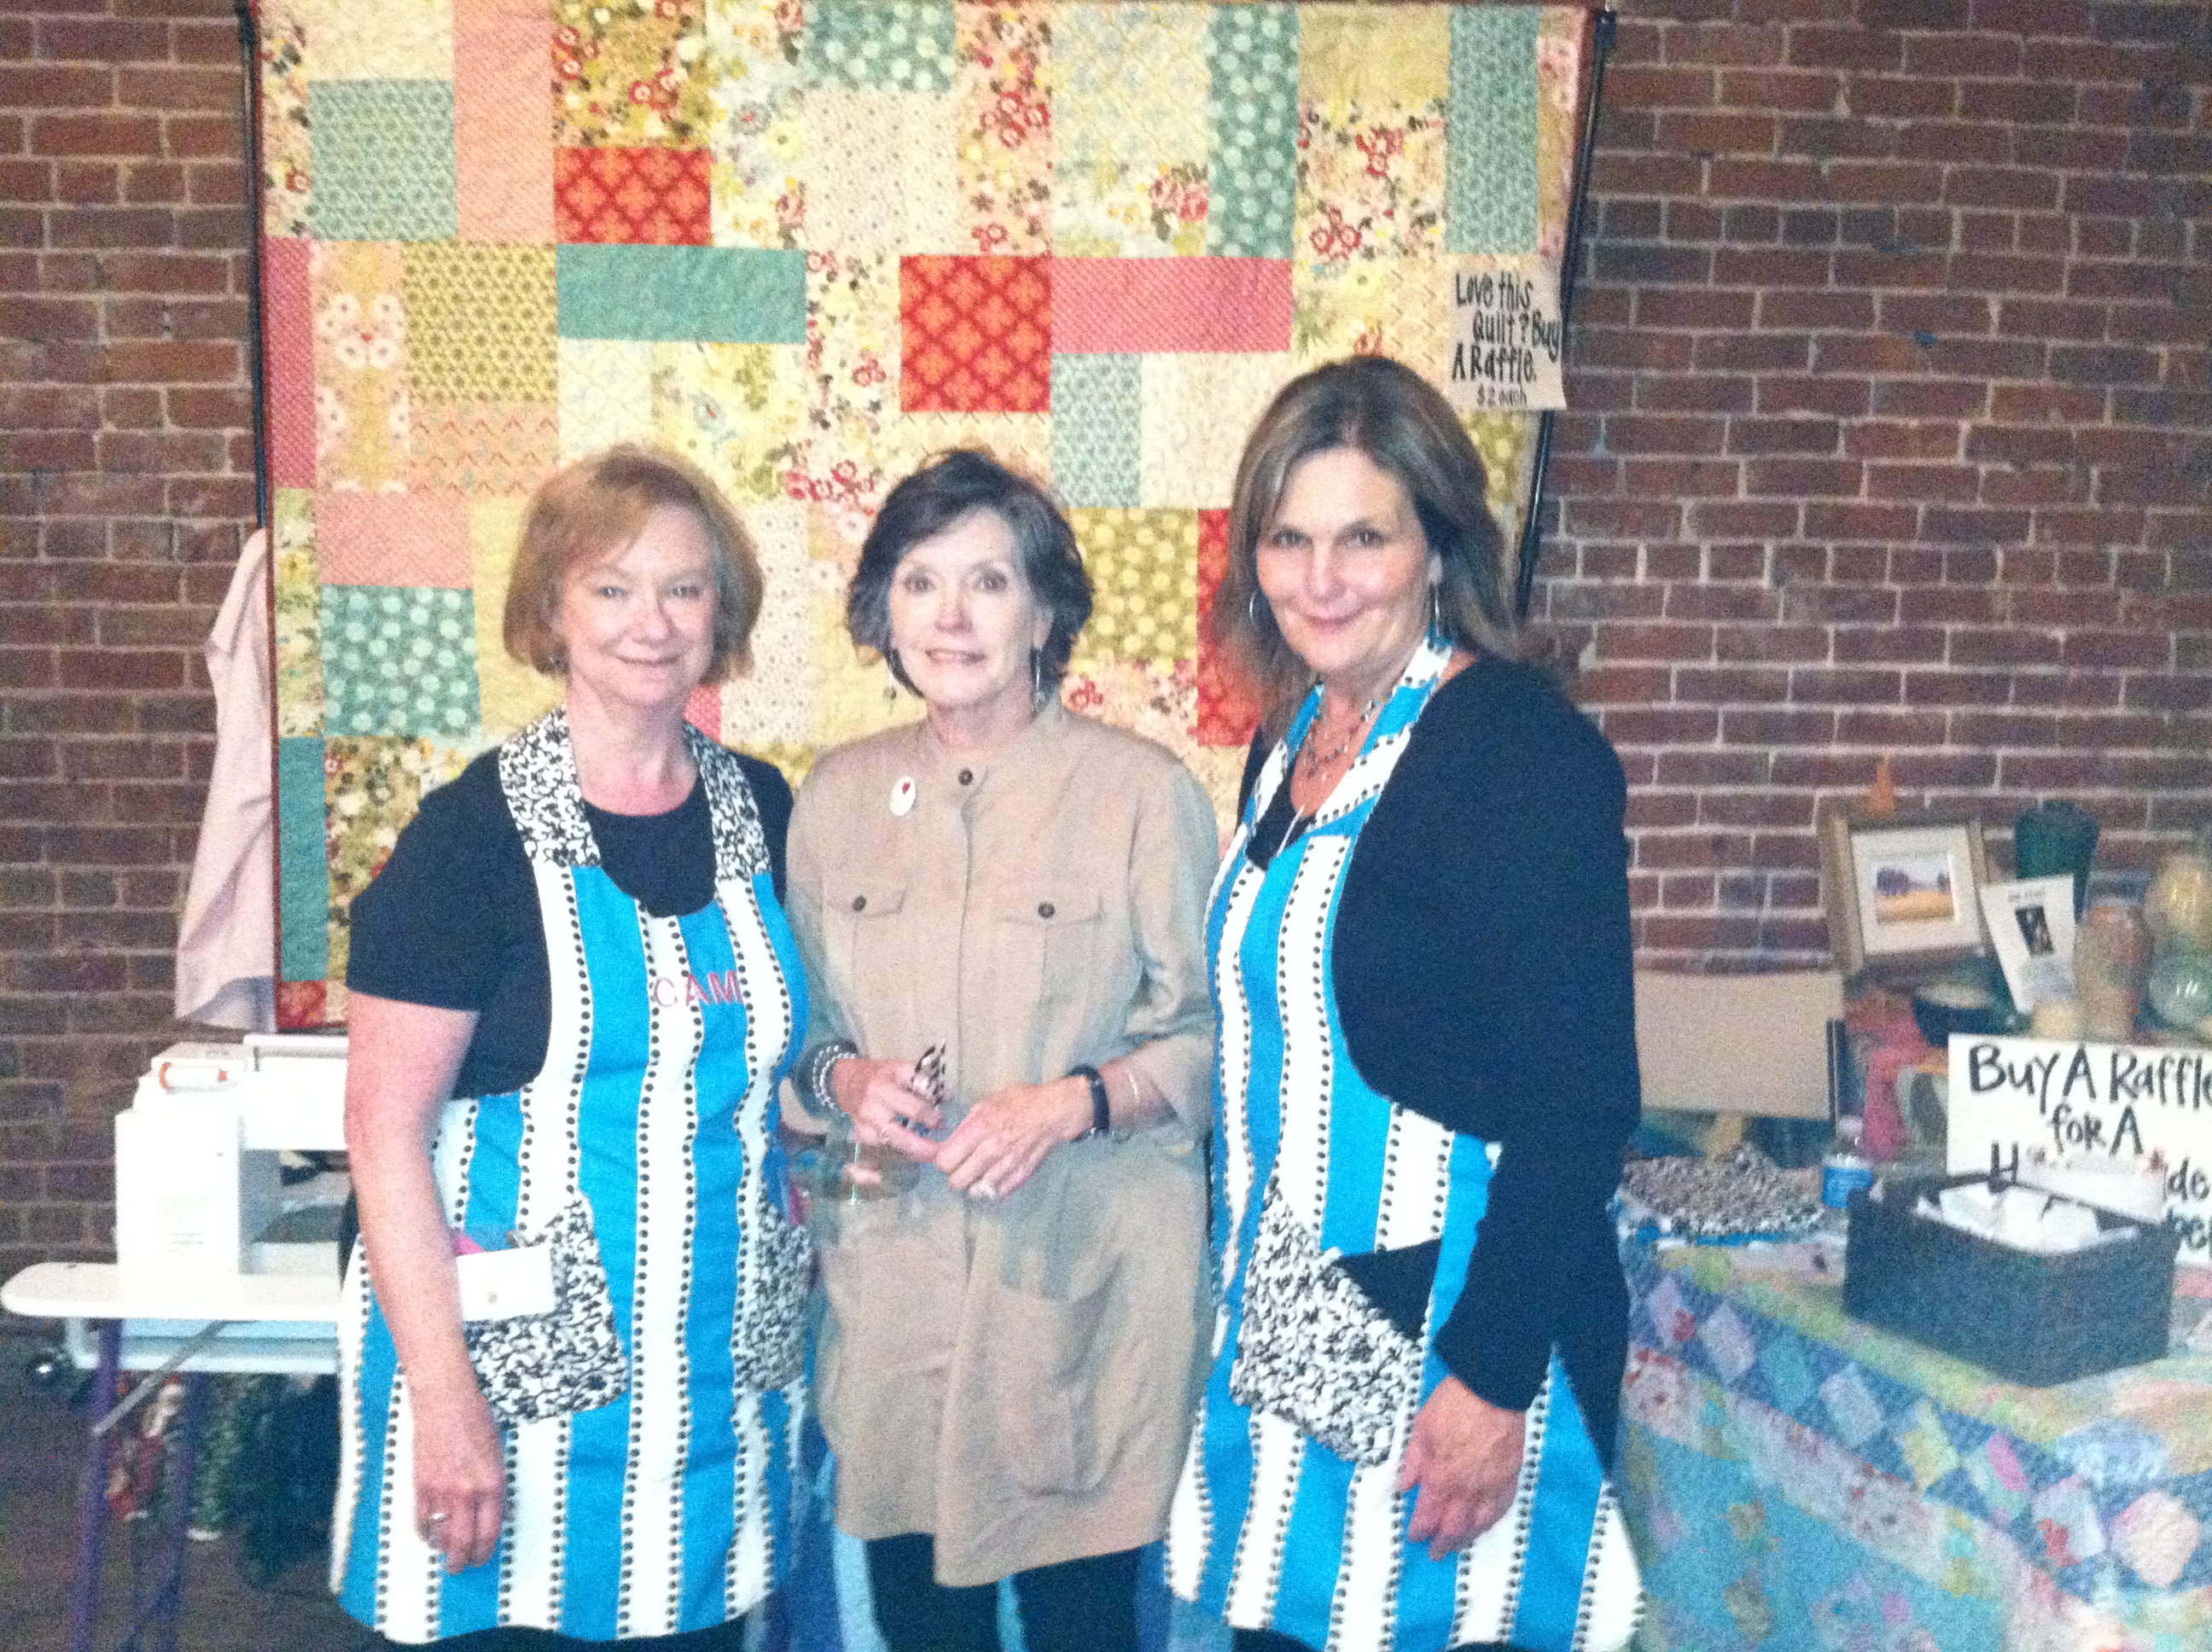 PHOTO: Quilters Cam McMillian, Lee Aylward, and Jan McCain